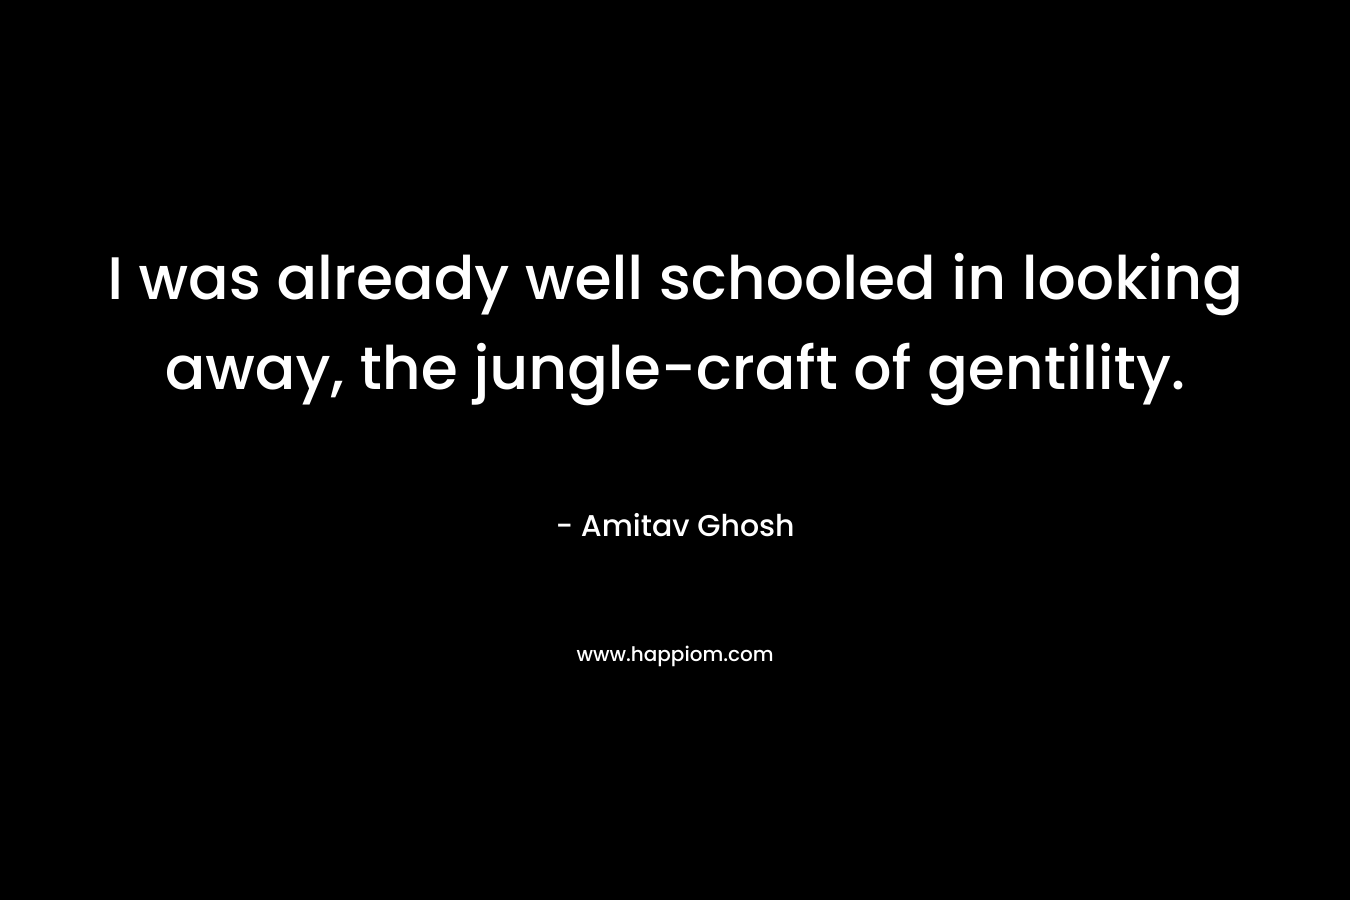 I was already well schooled in looking away, the jungle-craft of gentility. – Amitav Ghosh